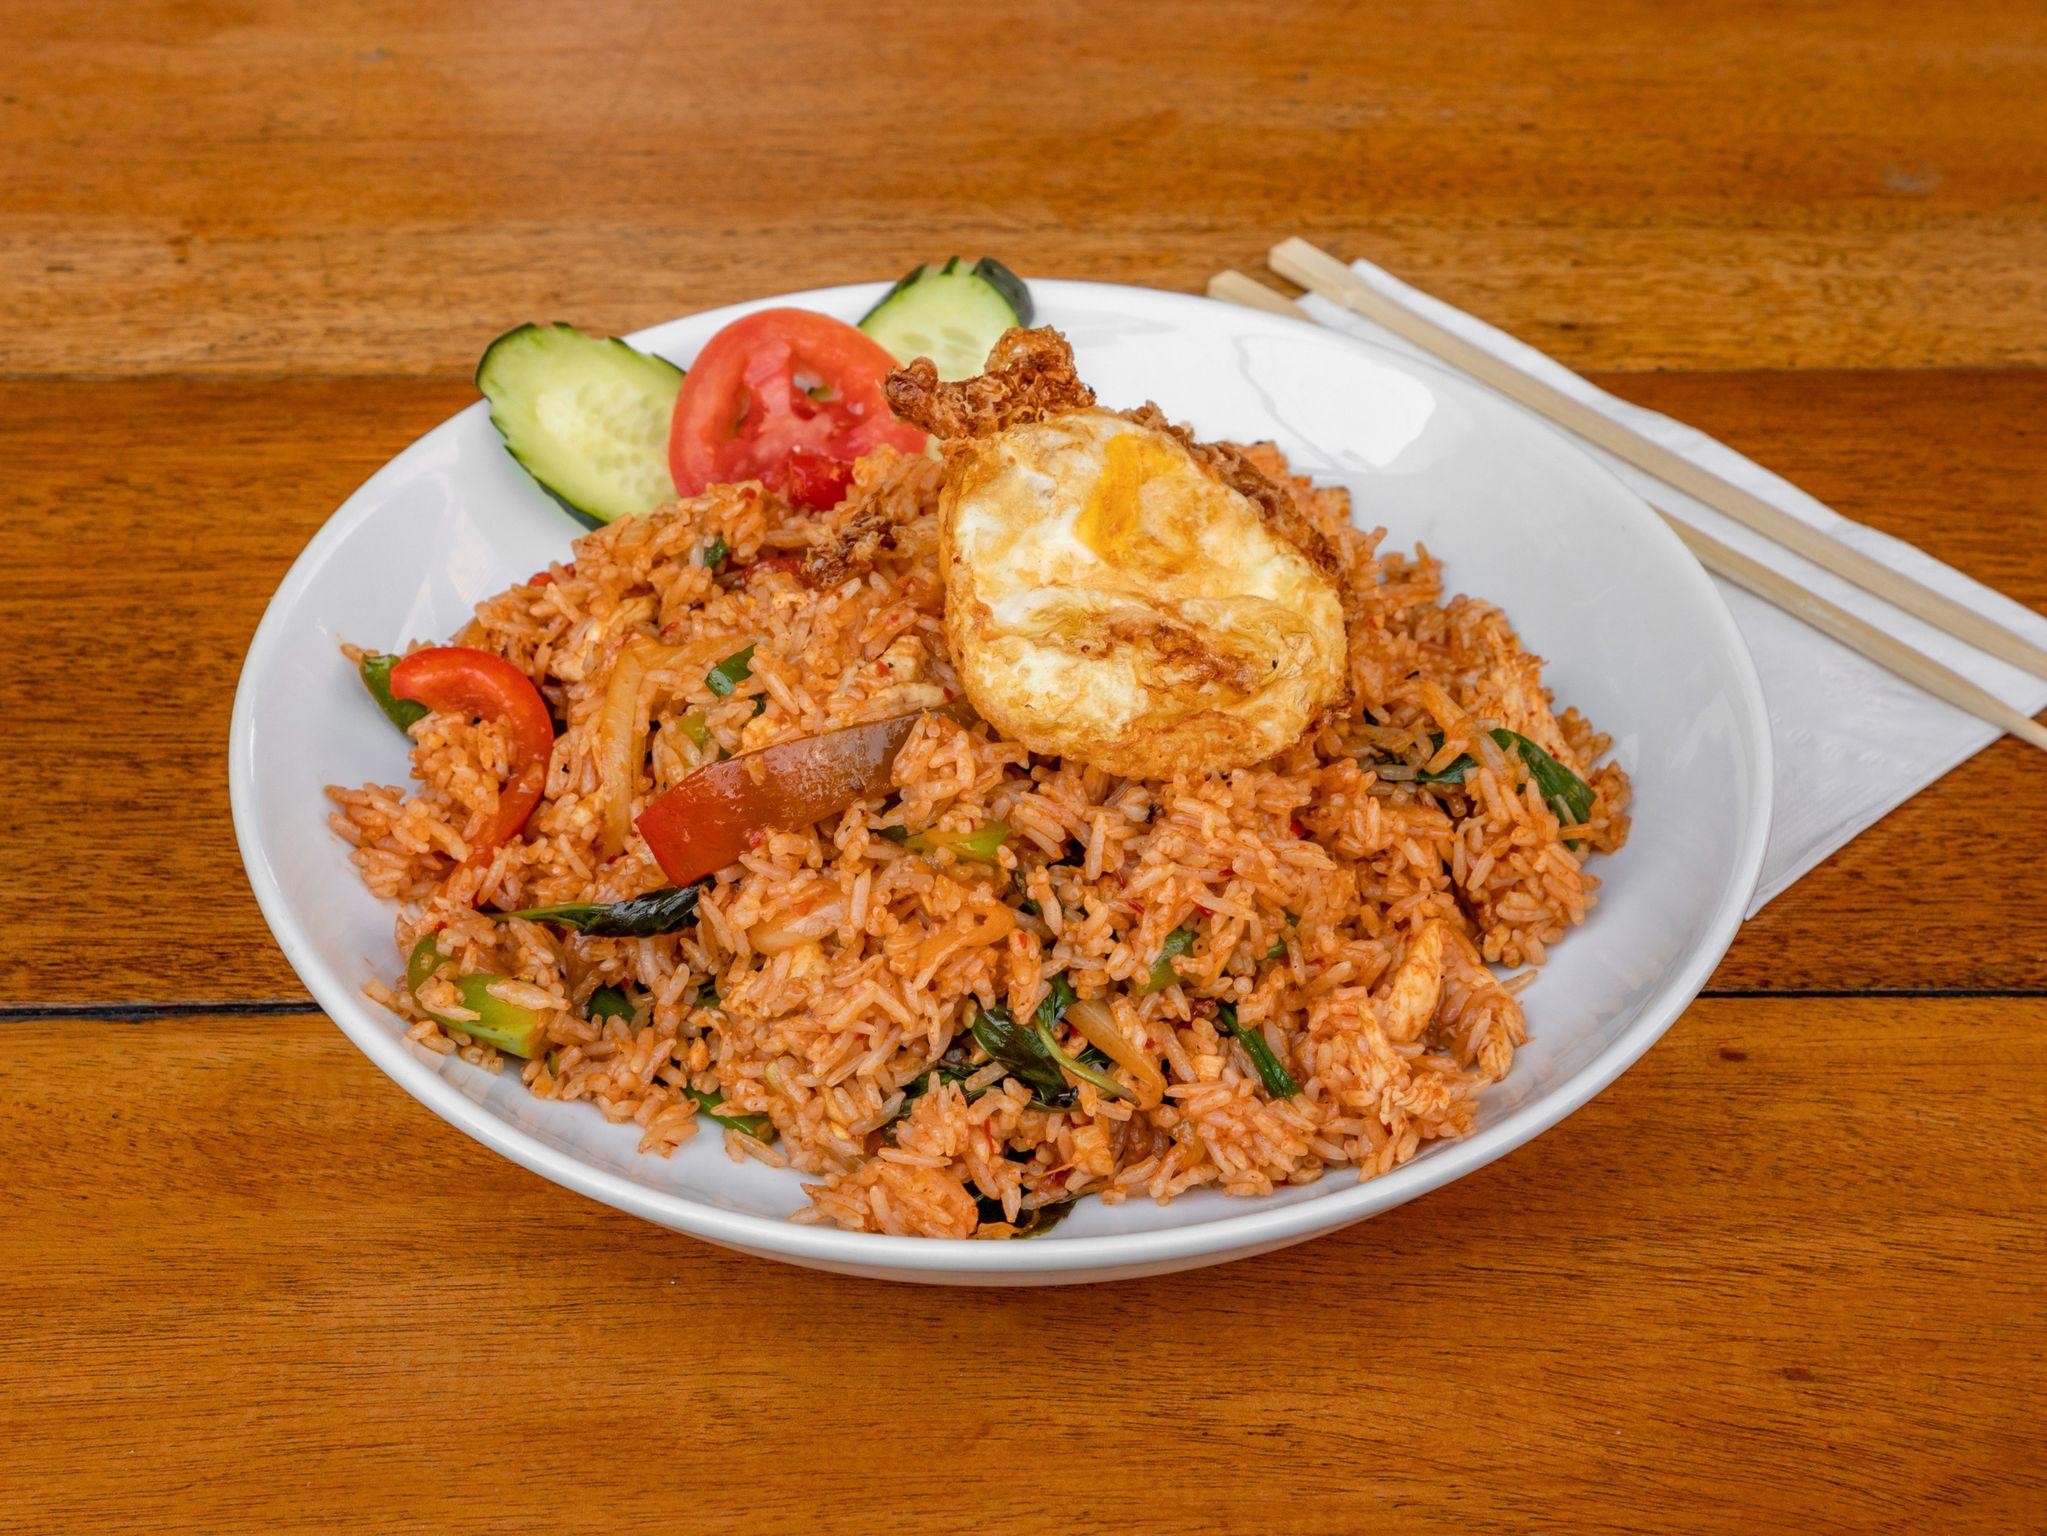 (L) Spicy Fried Rice with Chicken